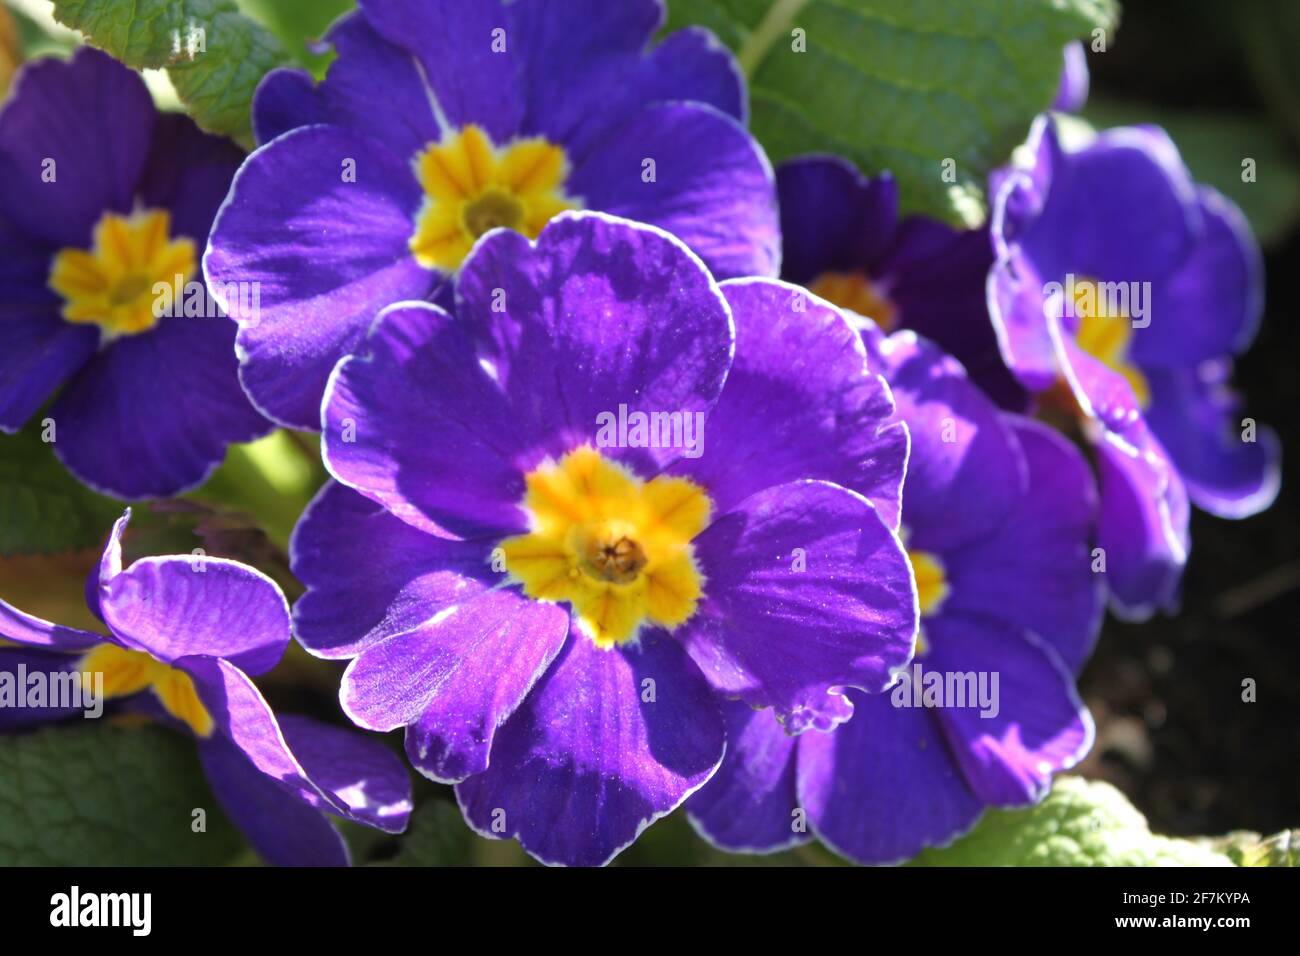 Purple primroses with yellow centres basking in glorious sunshine. Sunny spring days walking the nature trails. Multi coloured primrose blooming. Stock Photo